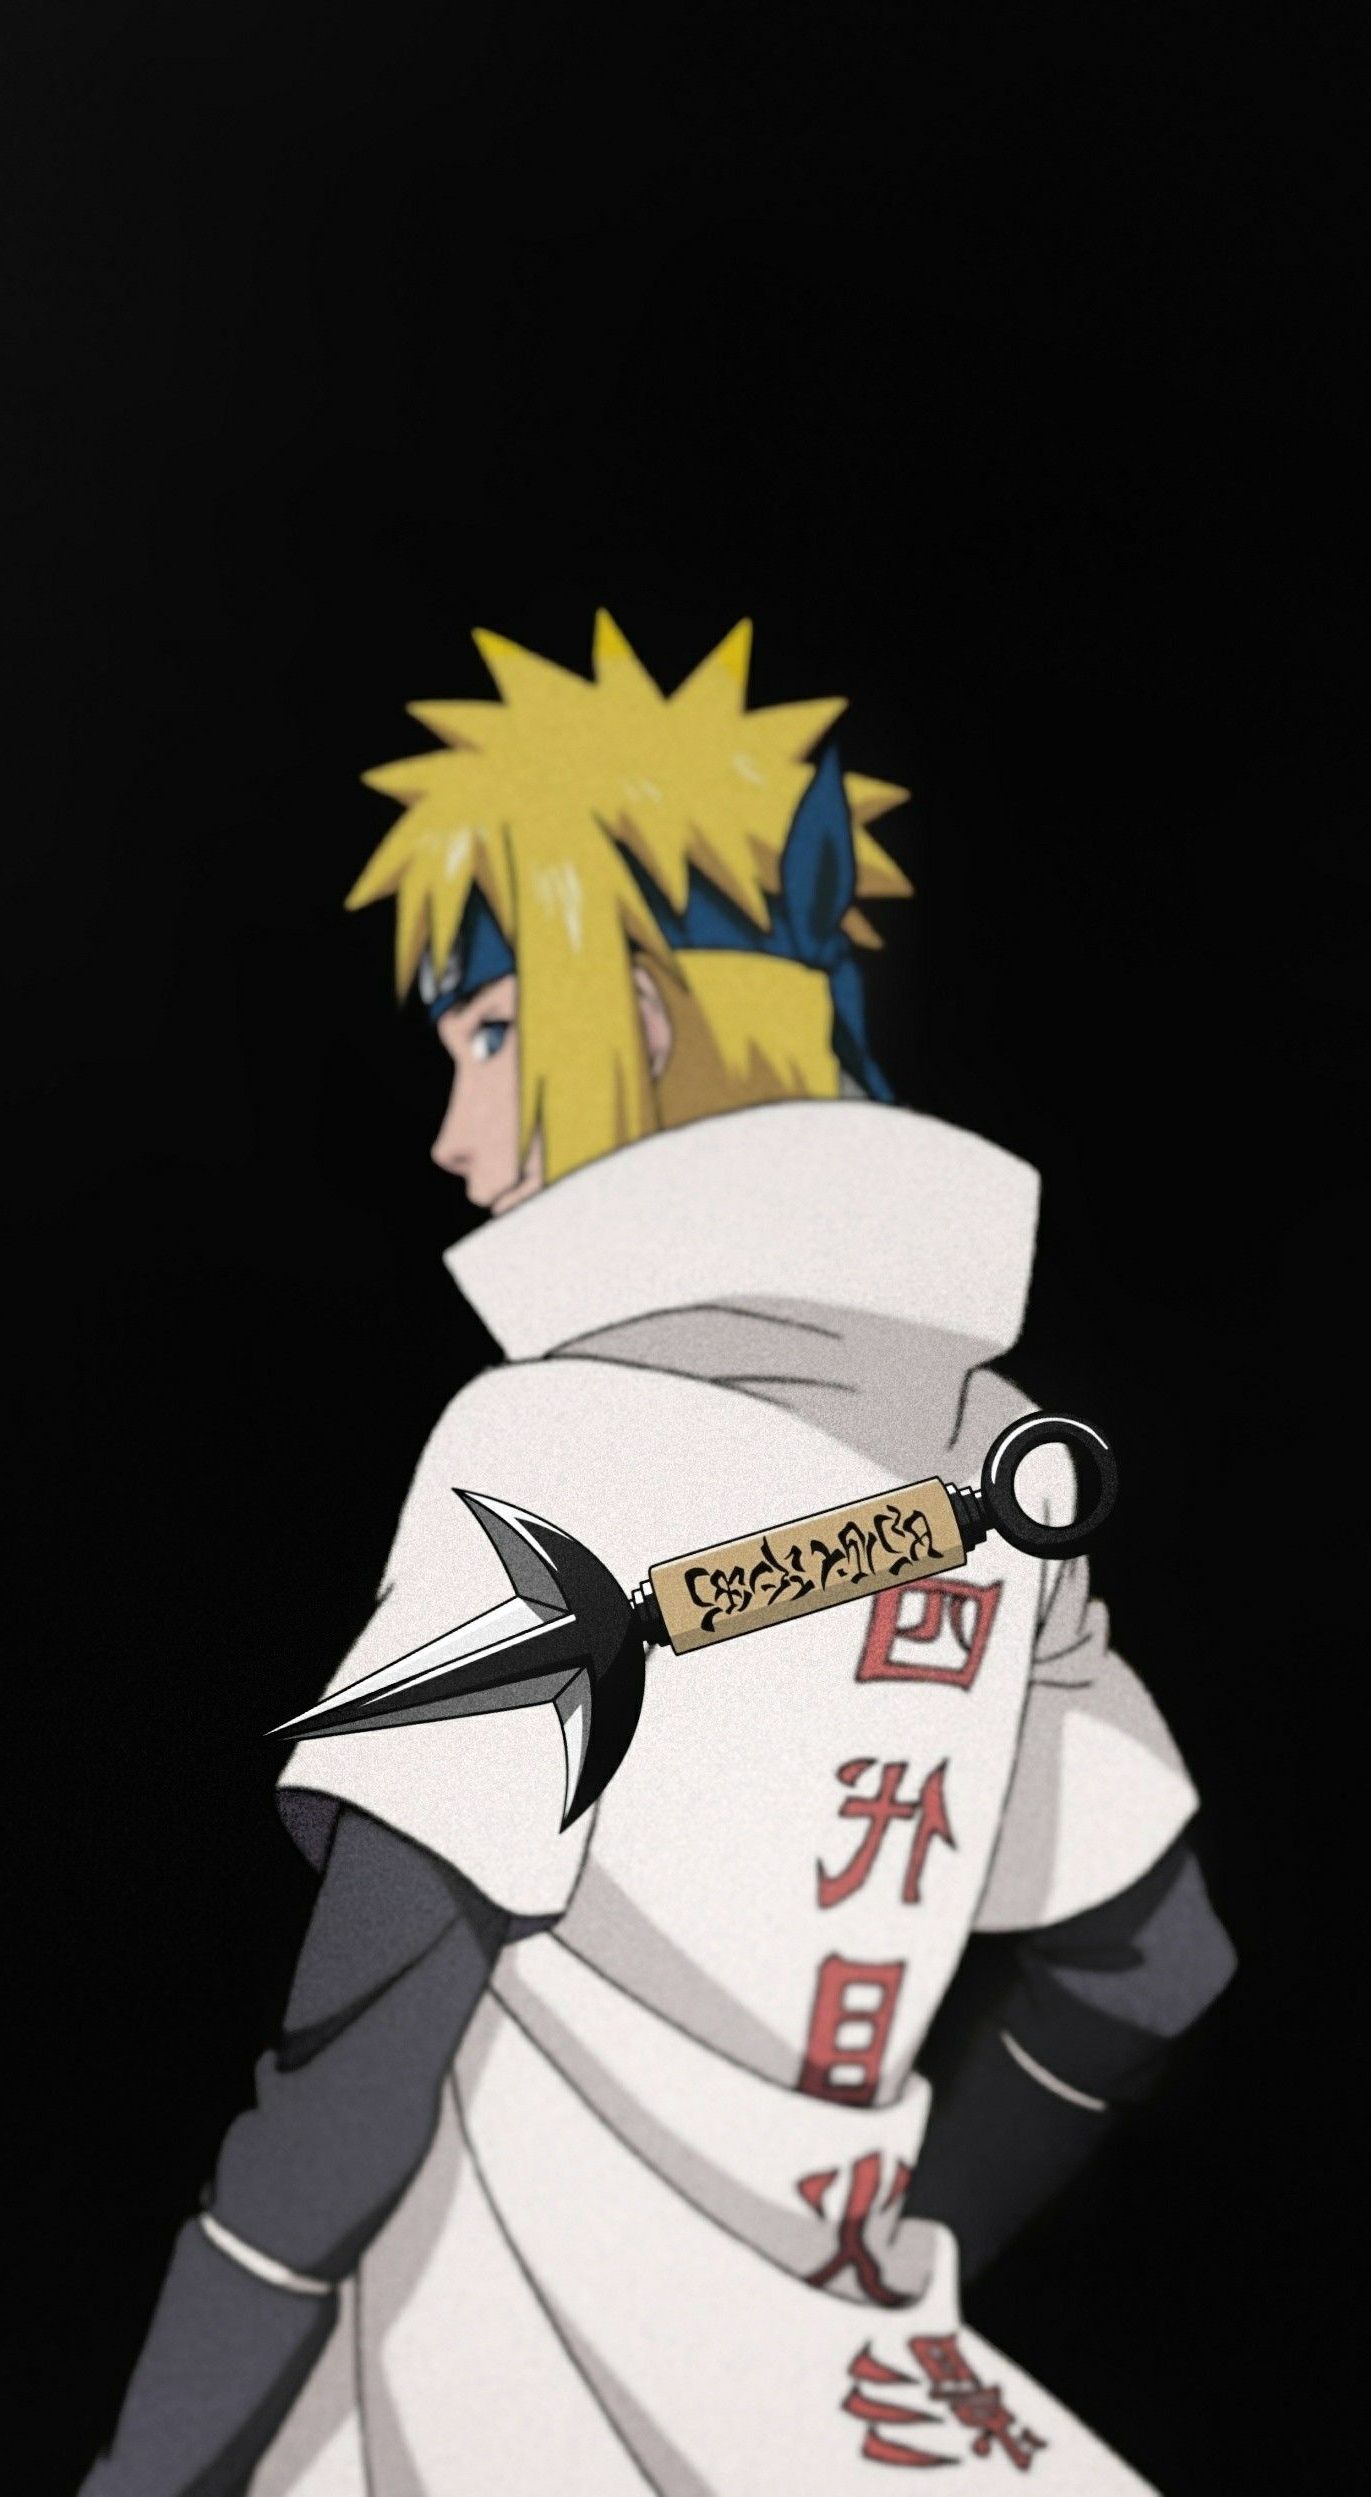 Picture Of Minato Wallpapers